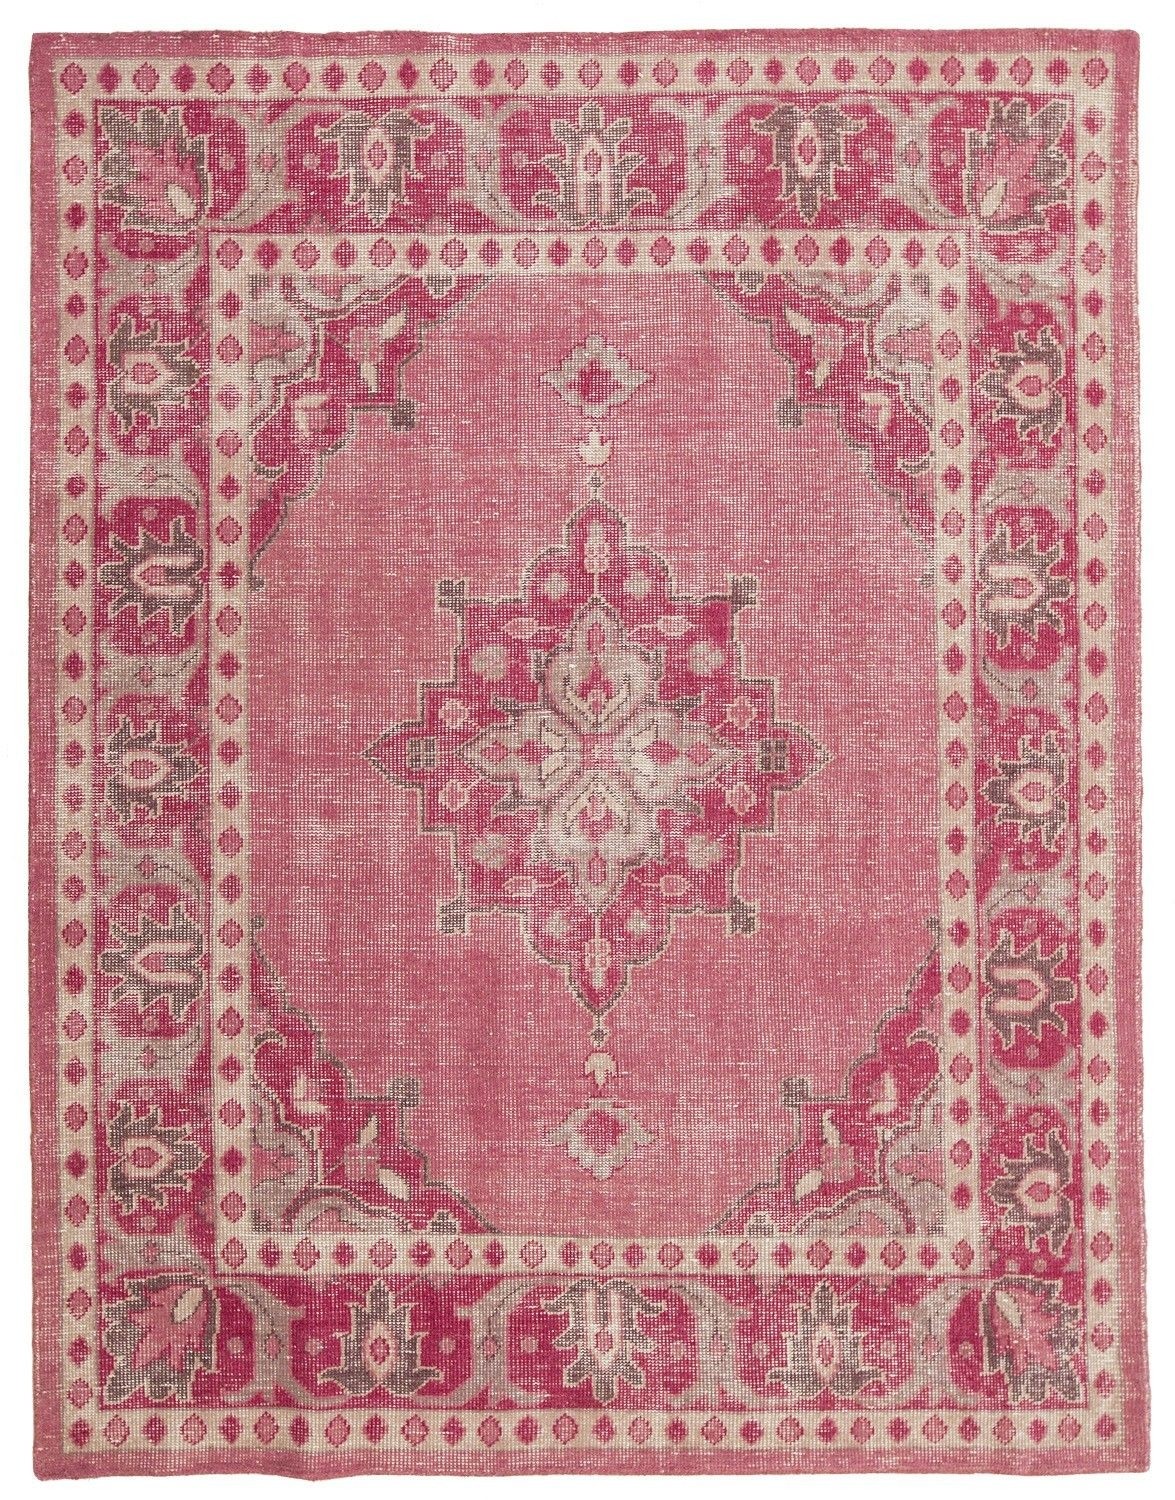 Shabby chic area rugs